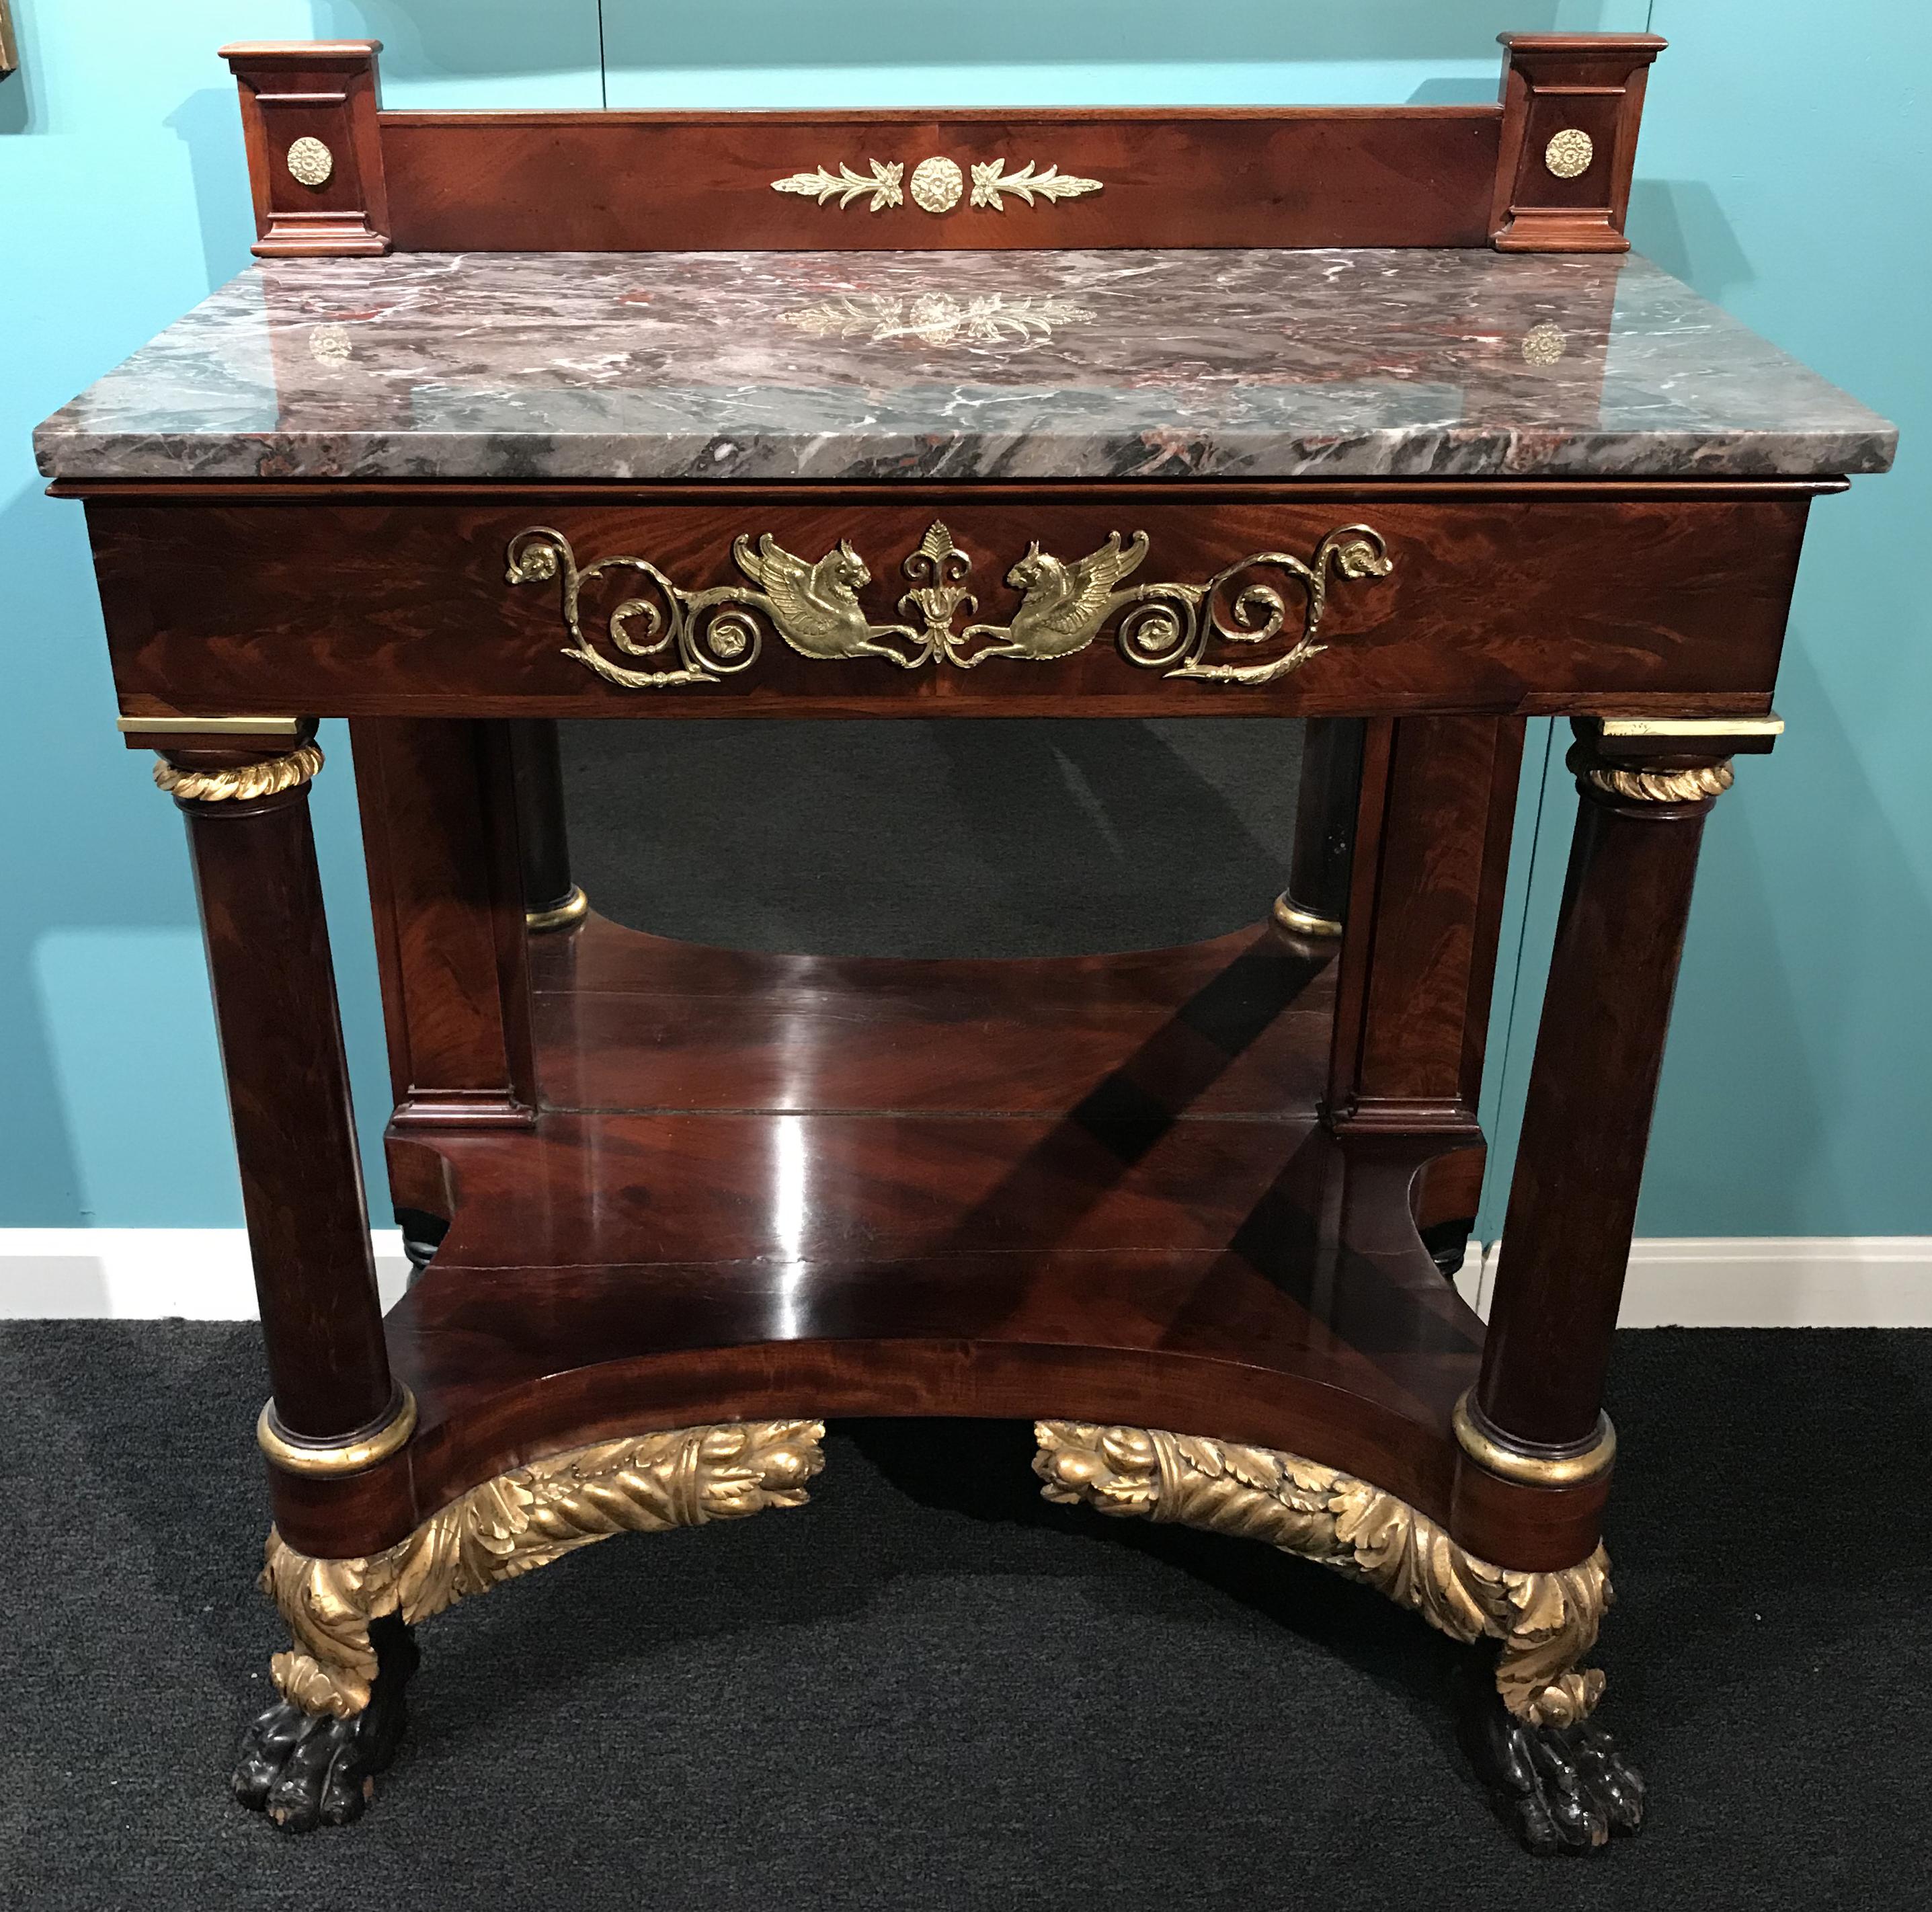 An exceptional Federal period mahogany pier table, console or server with rectangle marble top accented with a mahogany raised backsplash with applied ormolu rosettes and foliate decoration, surmounting a front apron with front applied griffin